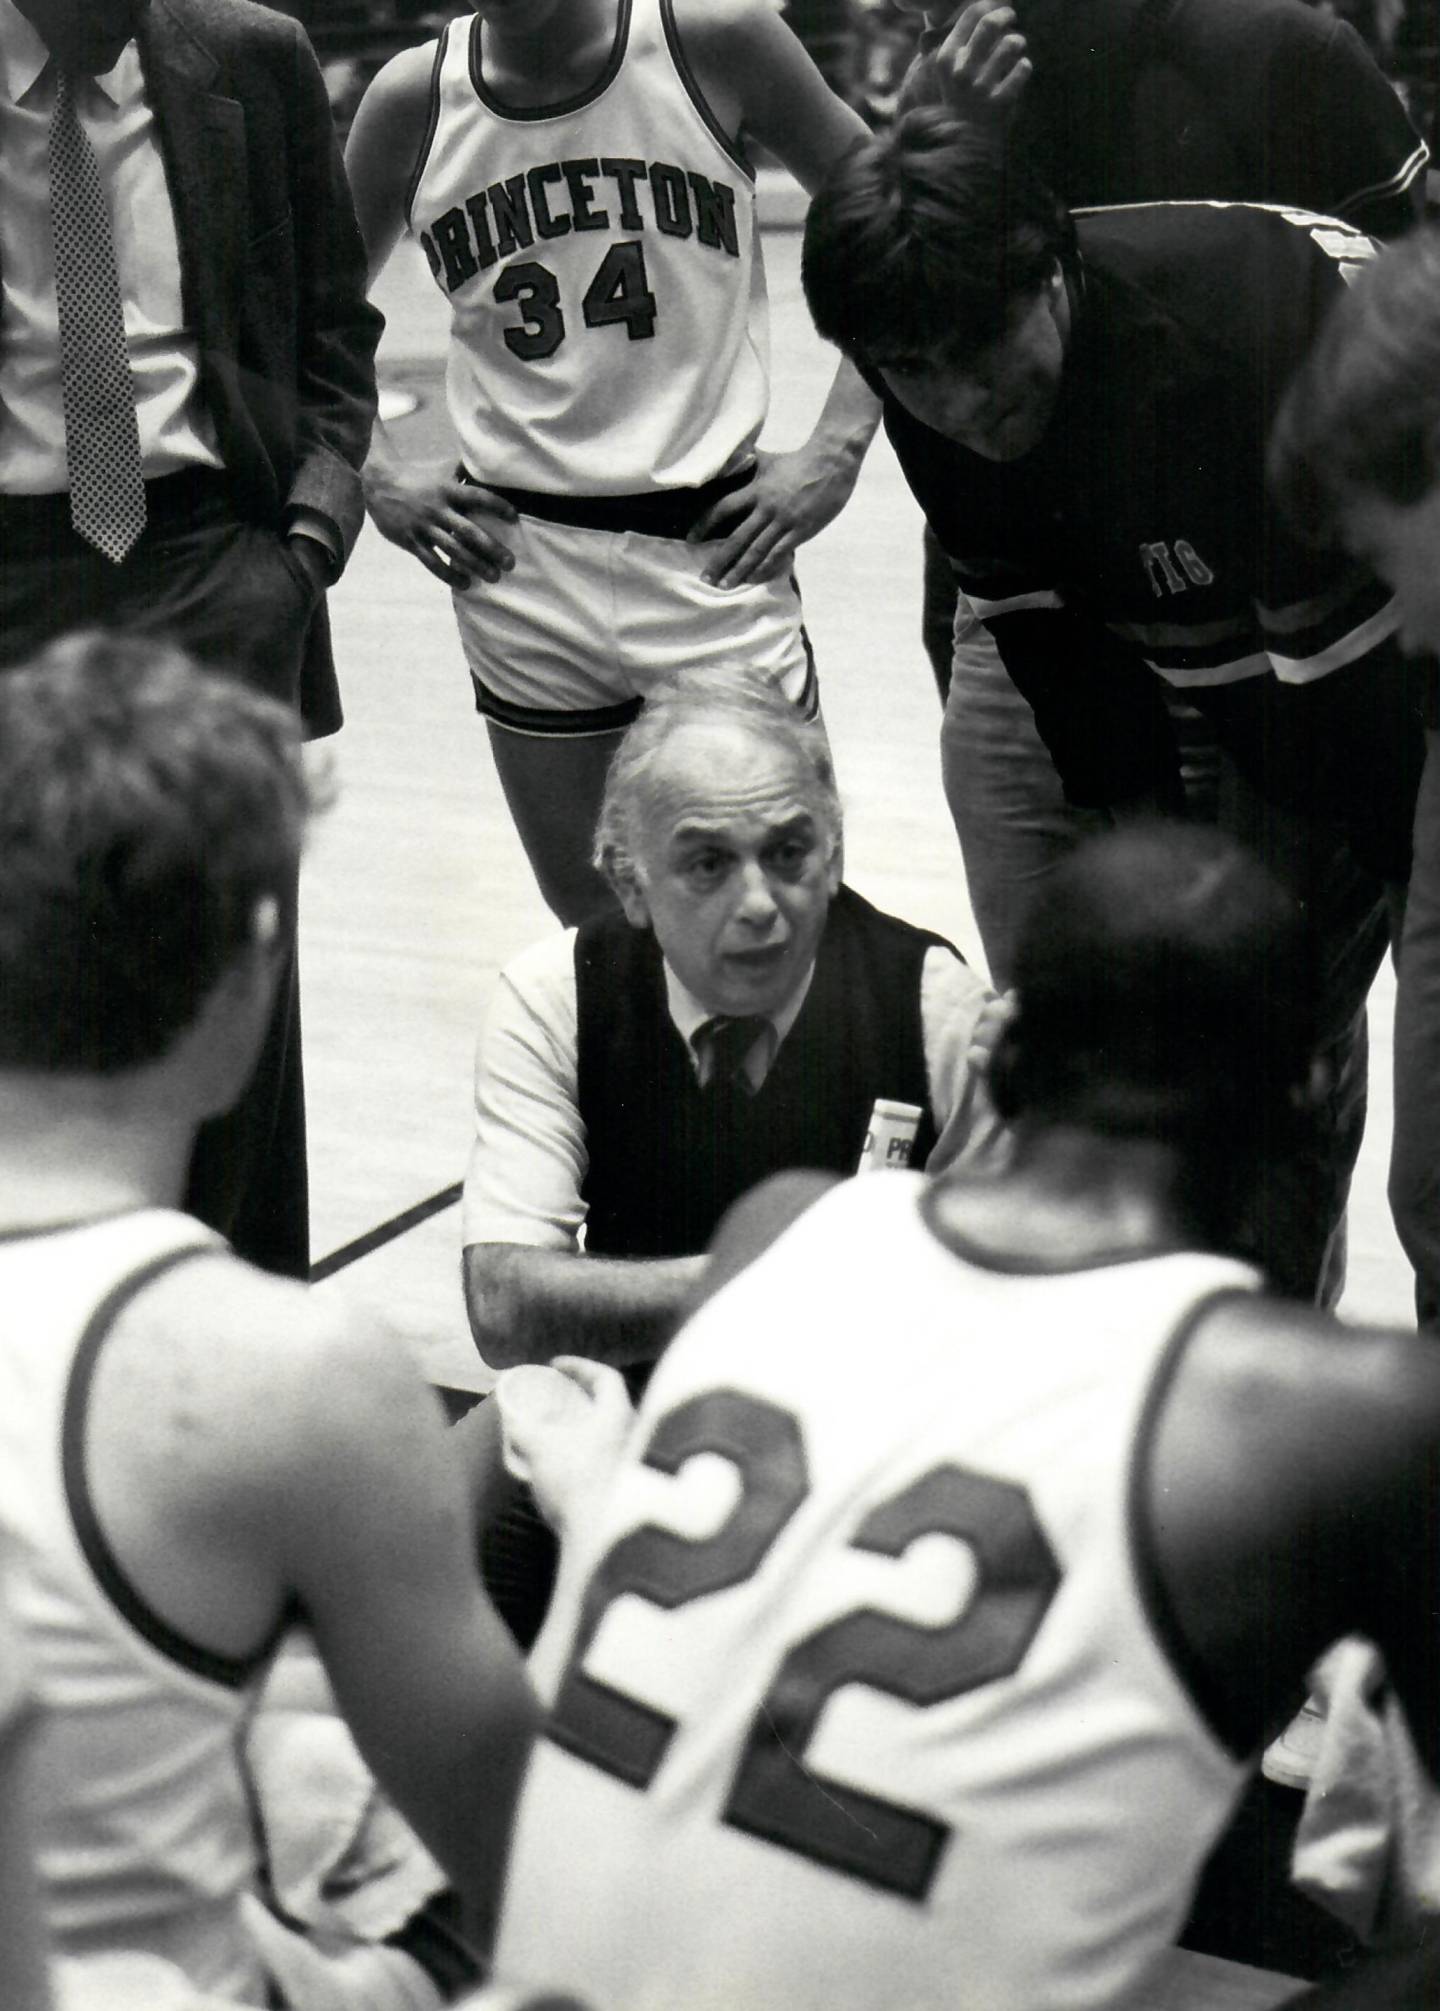 Coach Carril huddling with his team